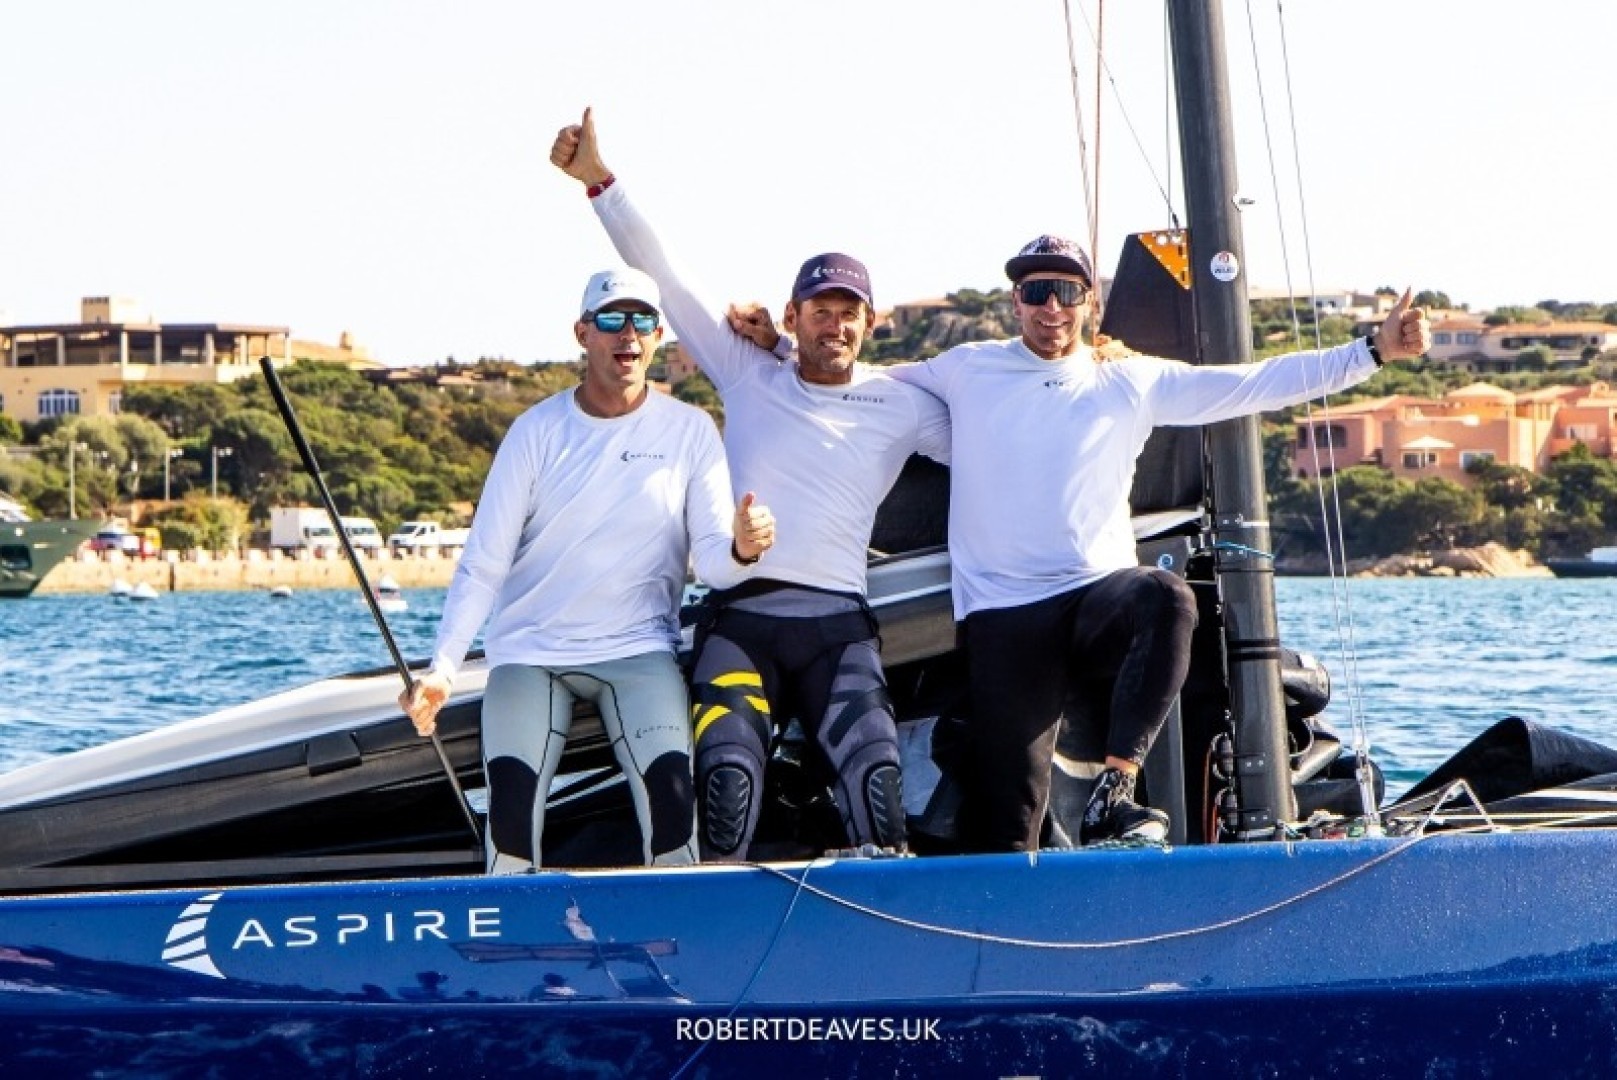 The team on Aspire, 2023 World Champions in the International 5.5 Metre Class. Photo credit: Robert Deaves